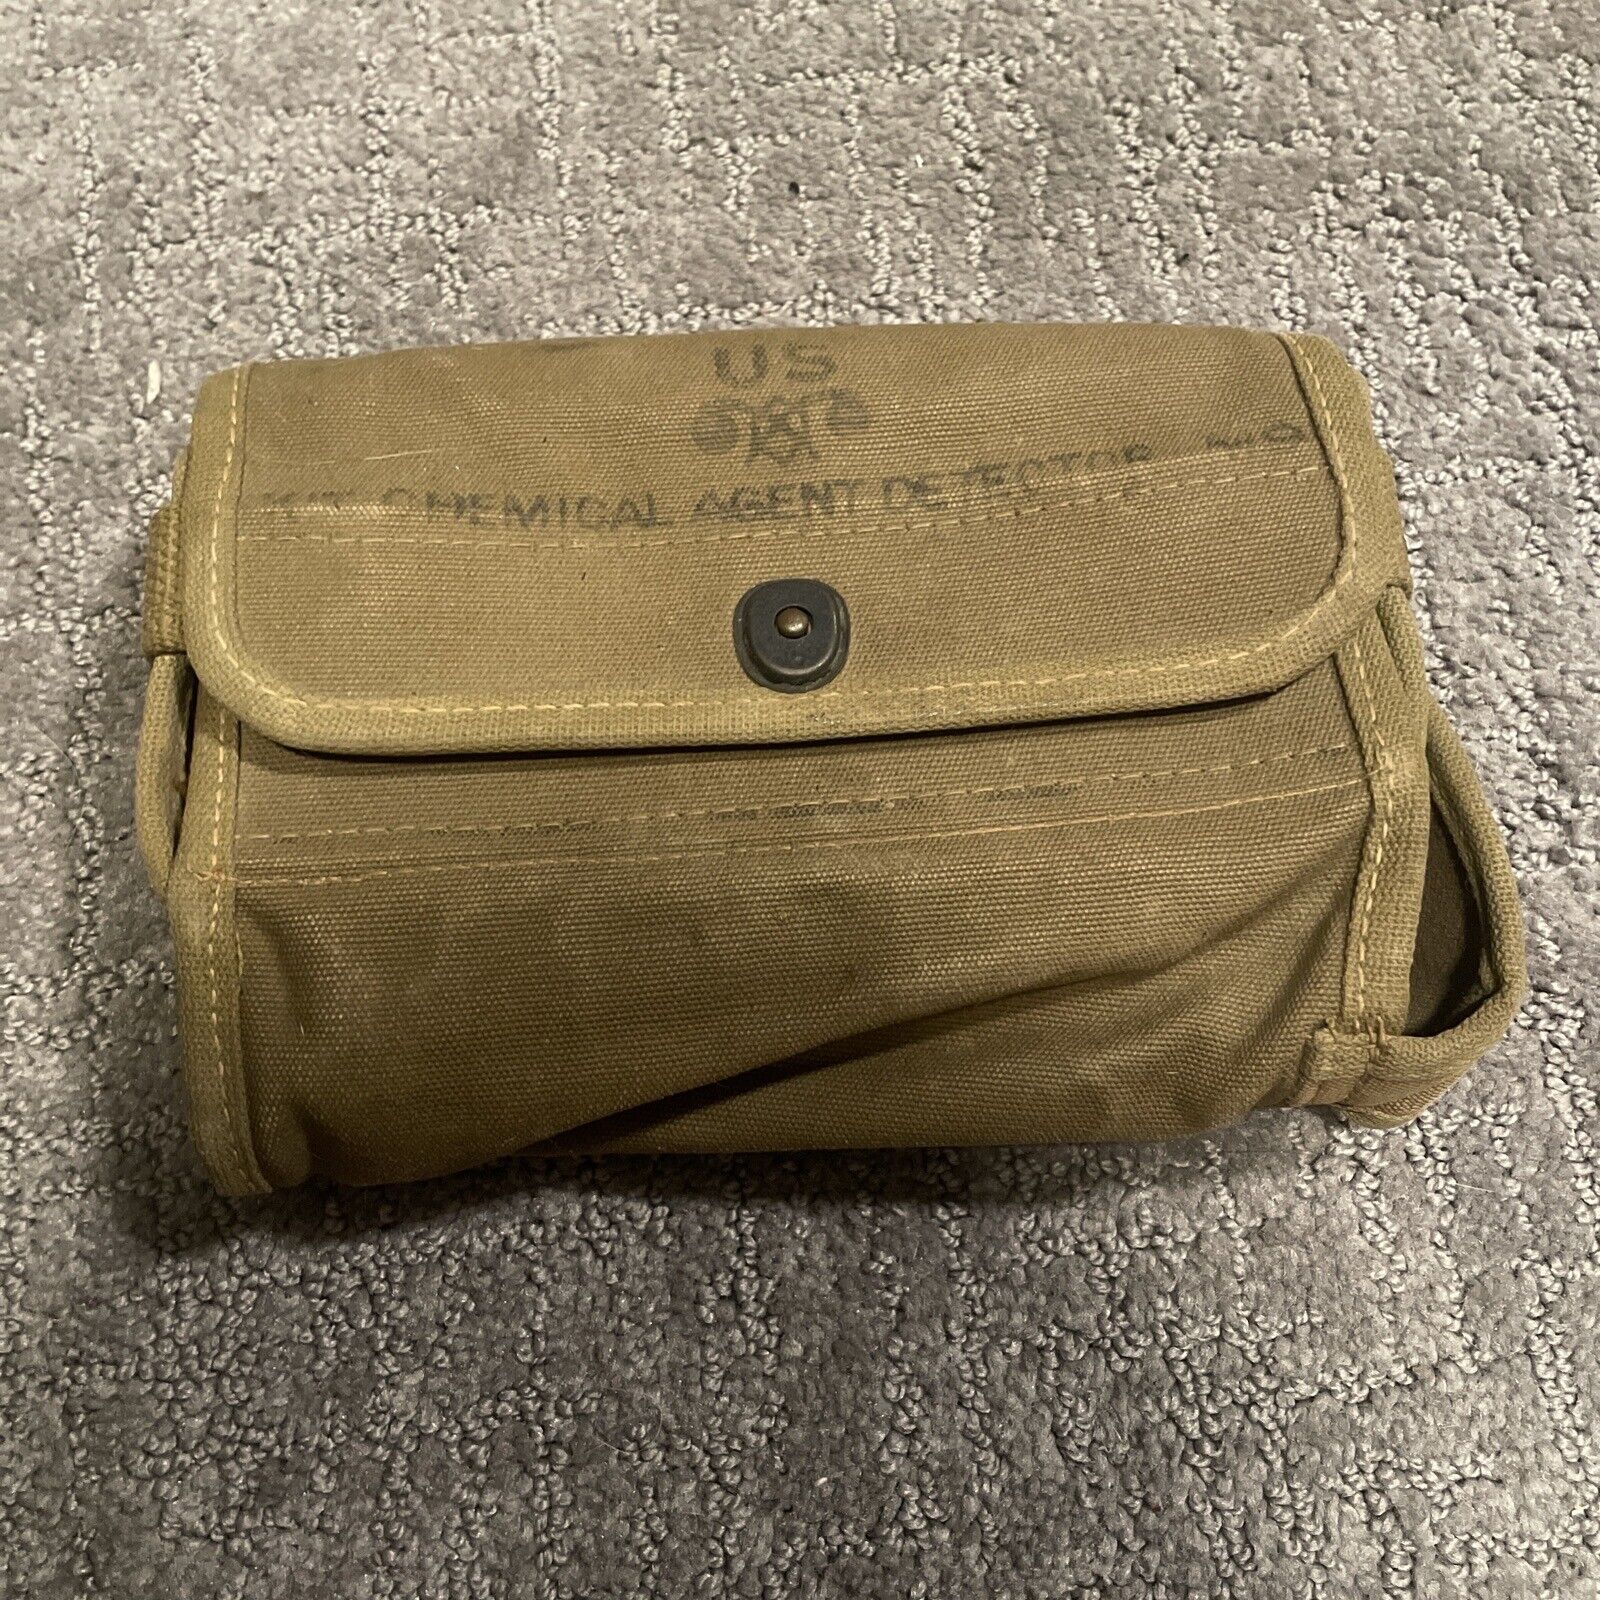 ORIGINAL RARE WW2 M9 Detector Kit Pouch Gutted, Missing Carrying Strap